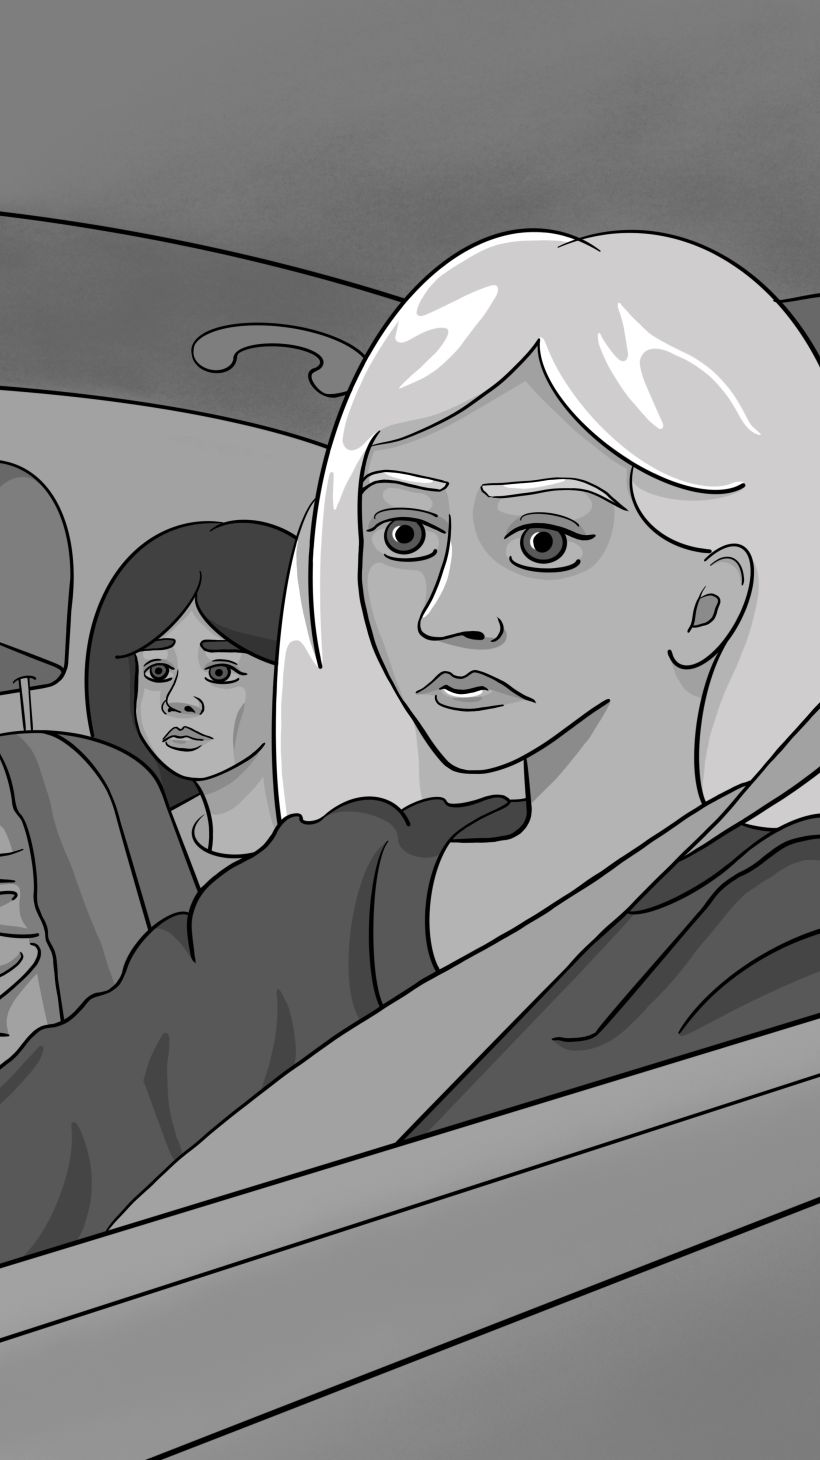 An illustration of people in a car, a woman is driving, a man is on his phone and the children sit in the back.